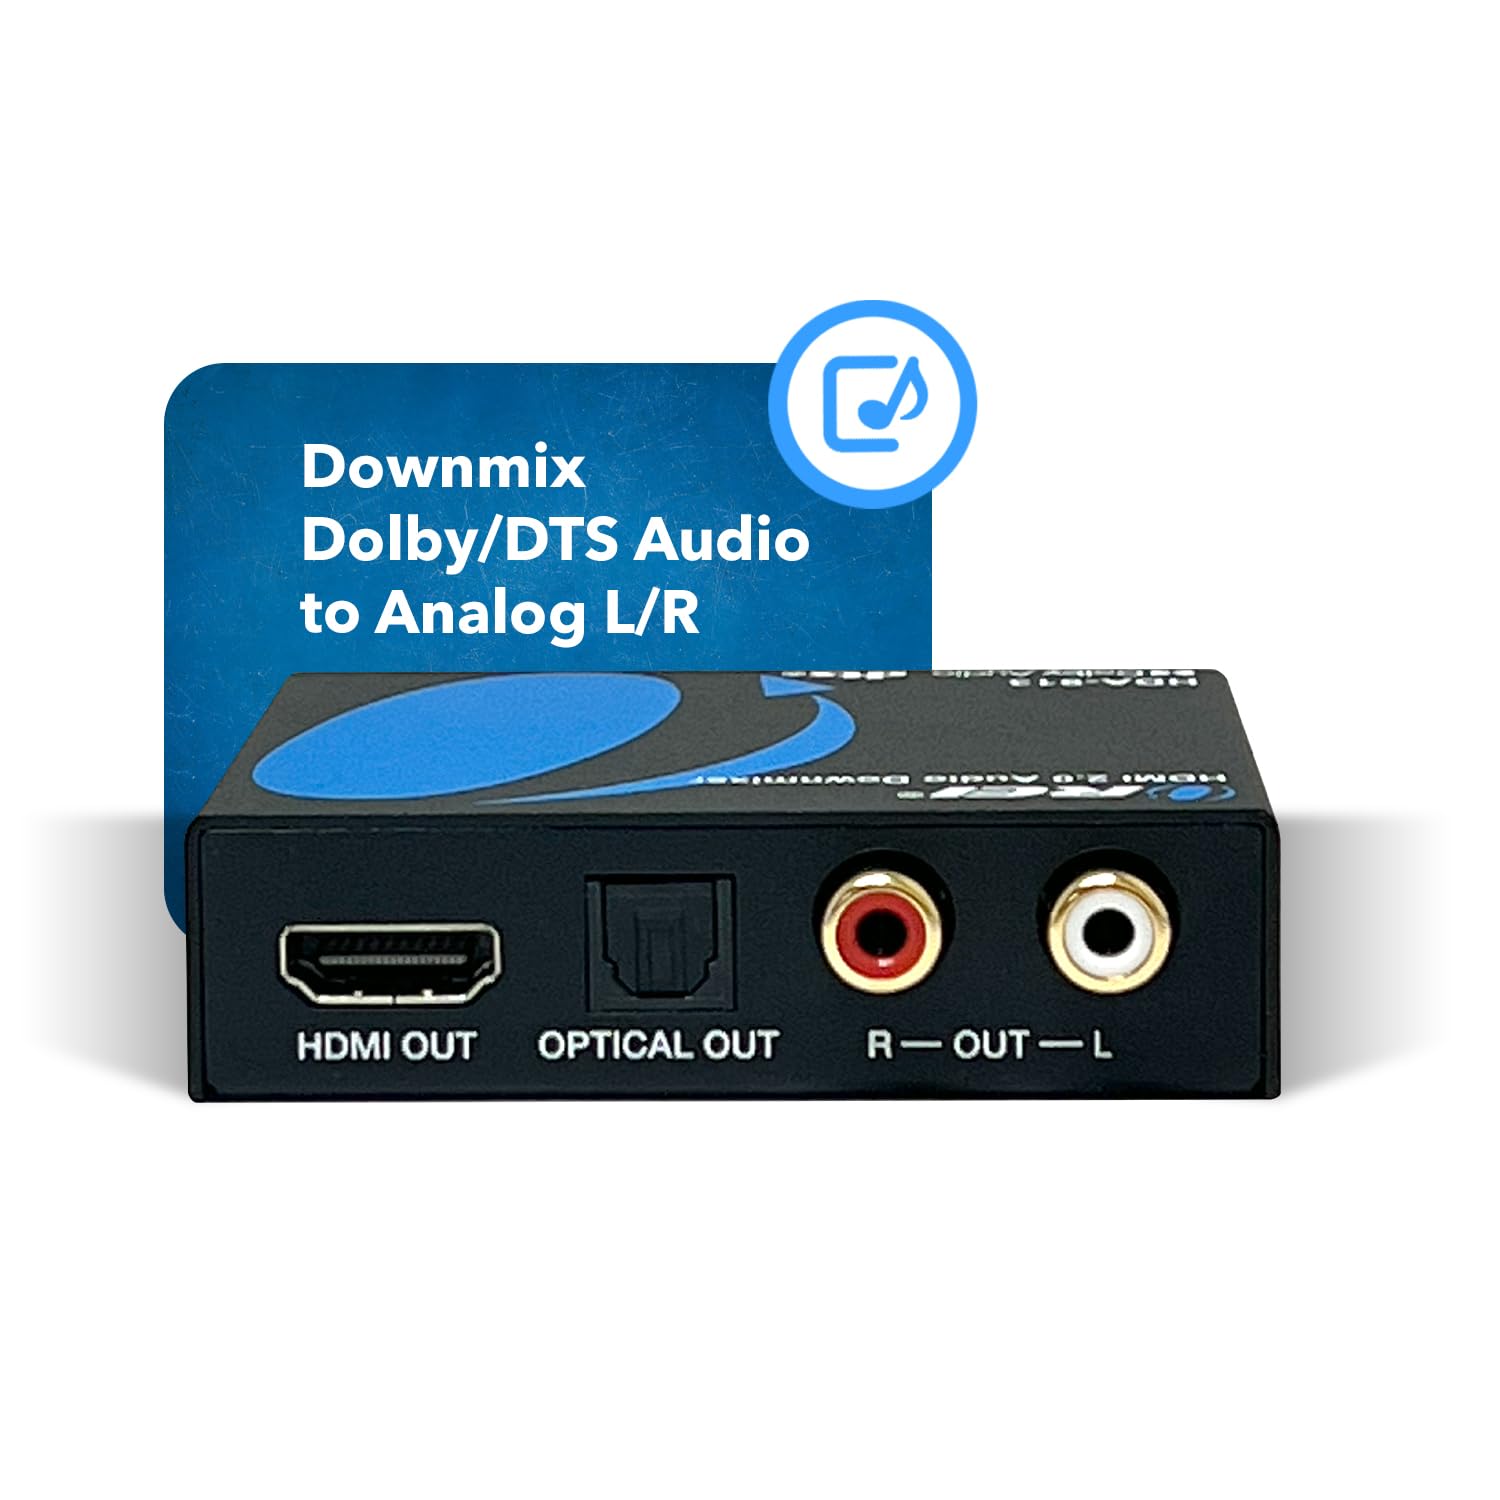 OREI 4K HDMI Audio Decoder Extractor, Downmix Dolby Audio Decoding DTS to Analog 3.5mm Jack Support Headphone/Speaker L/R Outputs or Optical SPDIF 2.0 CEC 1080p 4K2K (HDA-913)